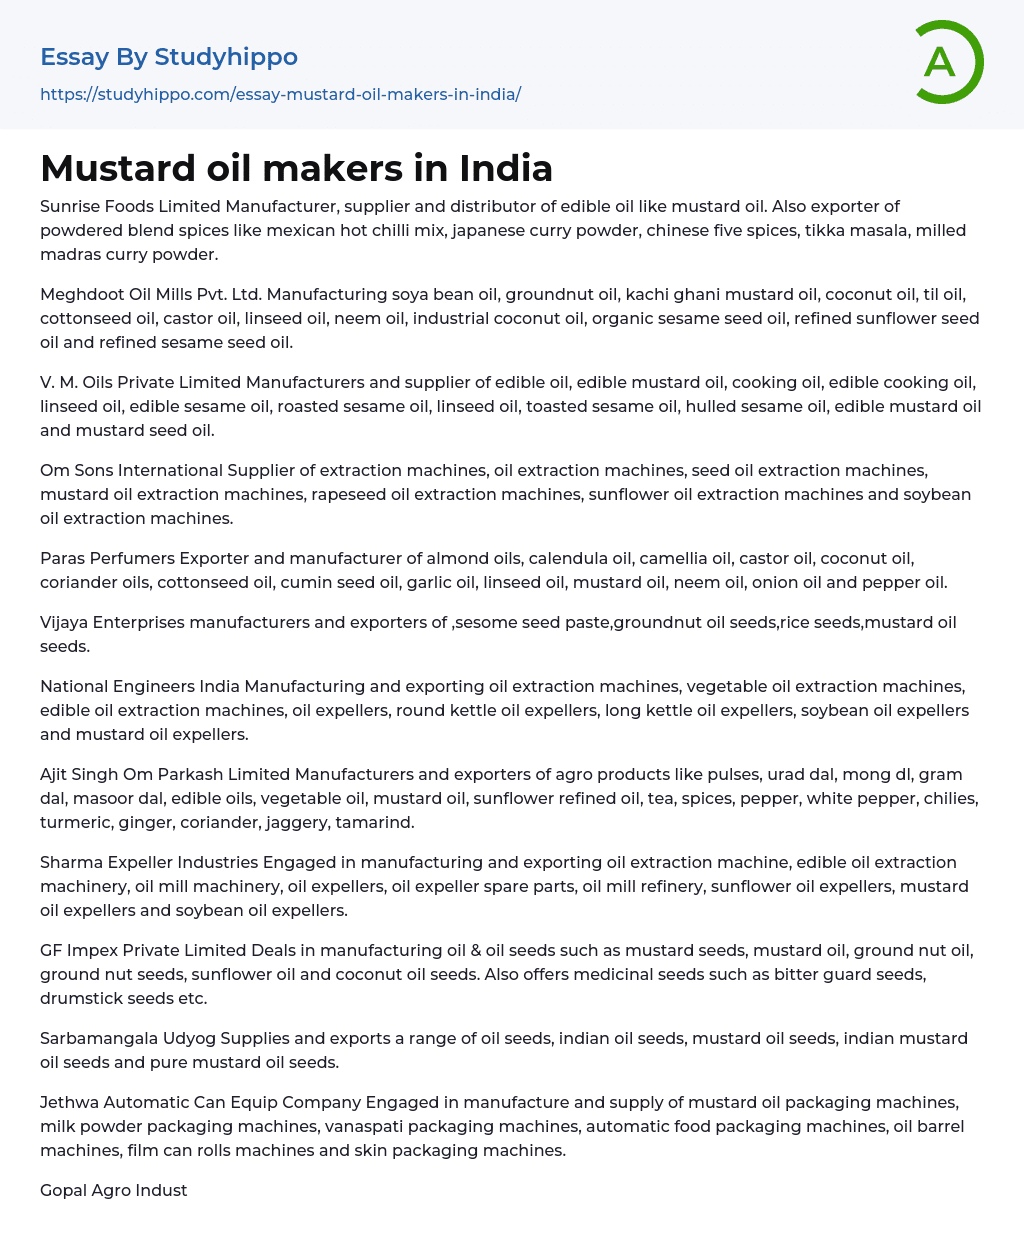 Mustard oil makers in India Essay Example